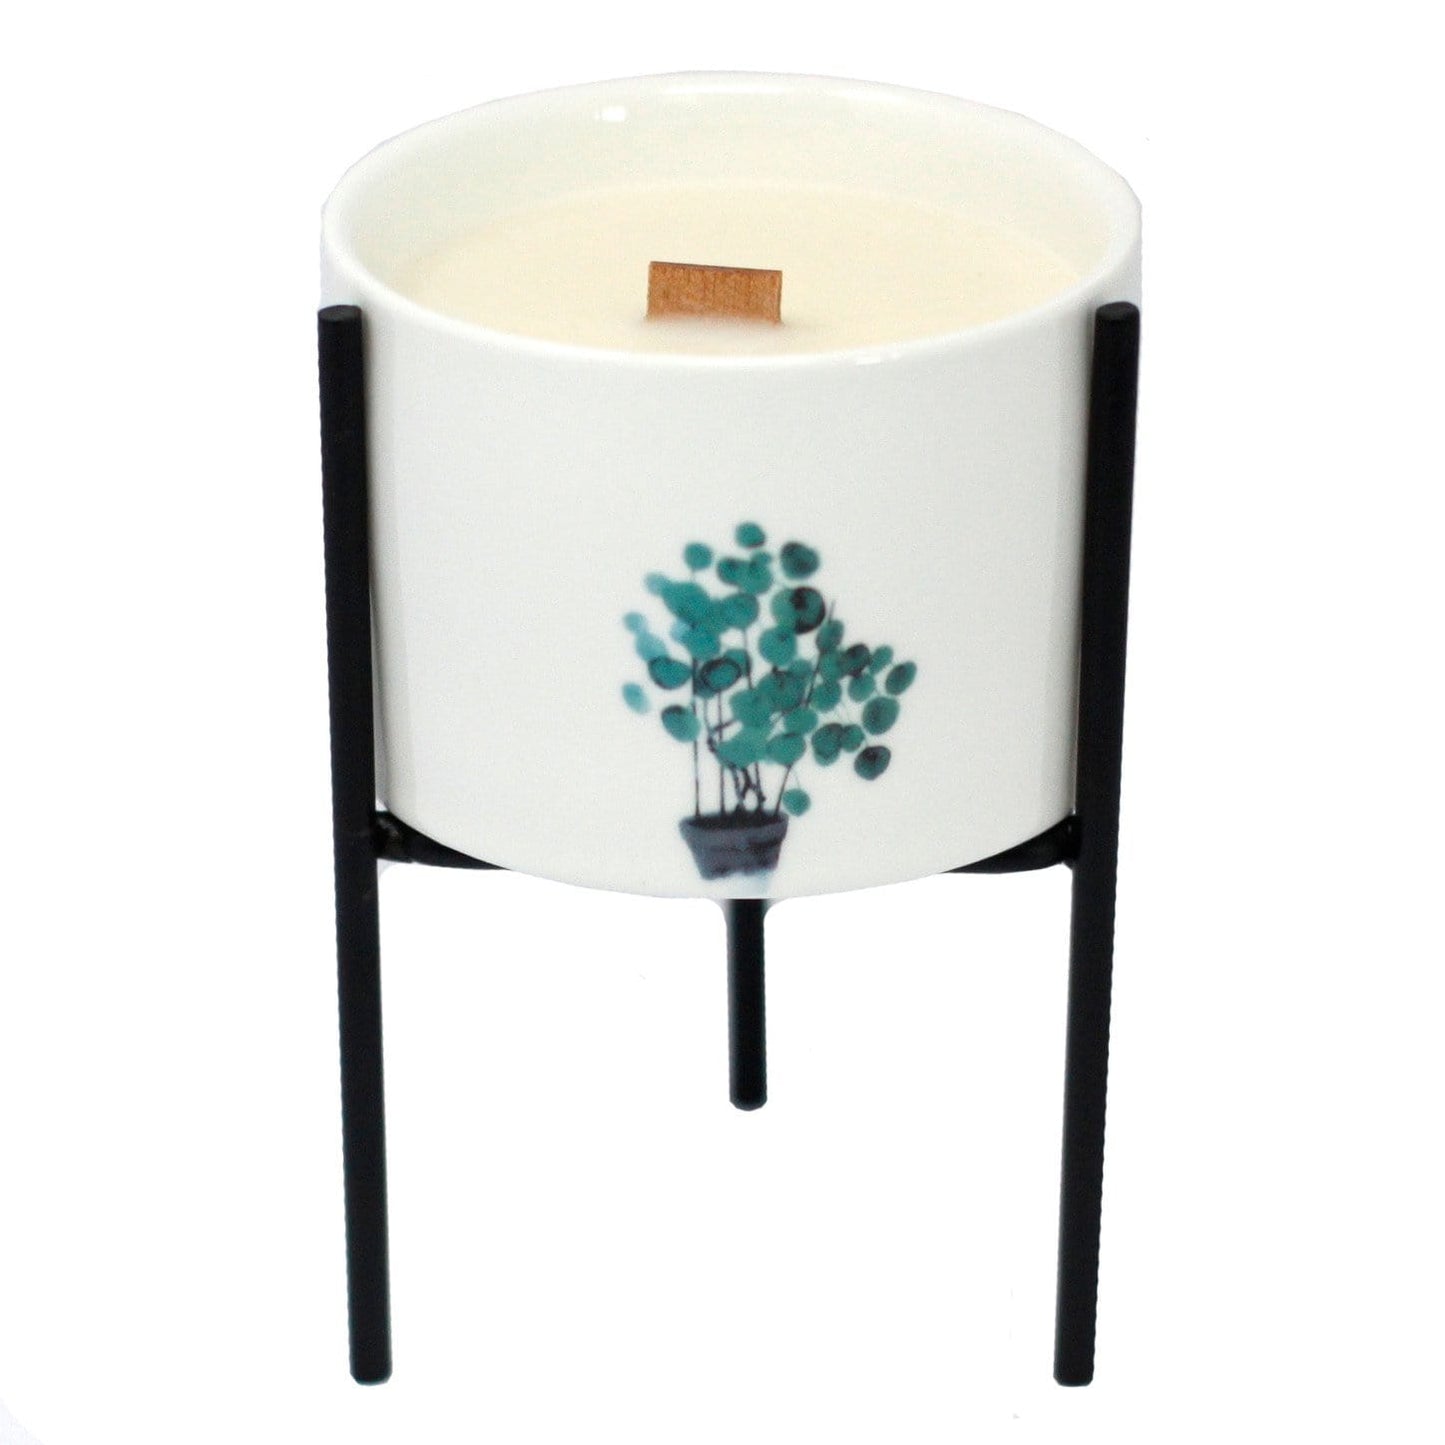 Botanical Wooden Wick Soy Candles - ShopGreenToday